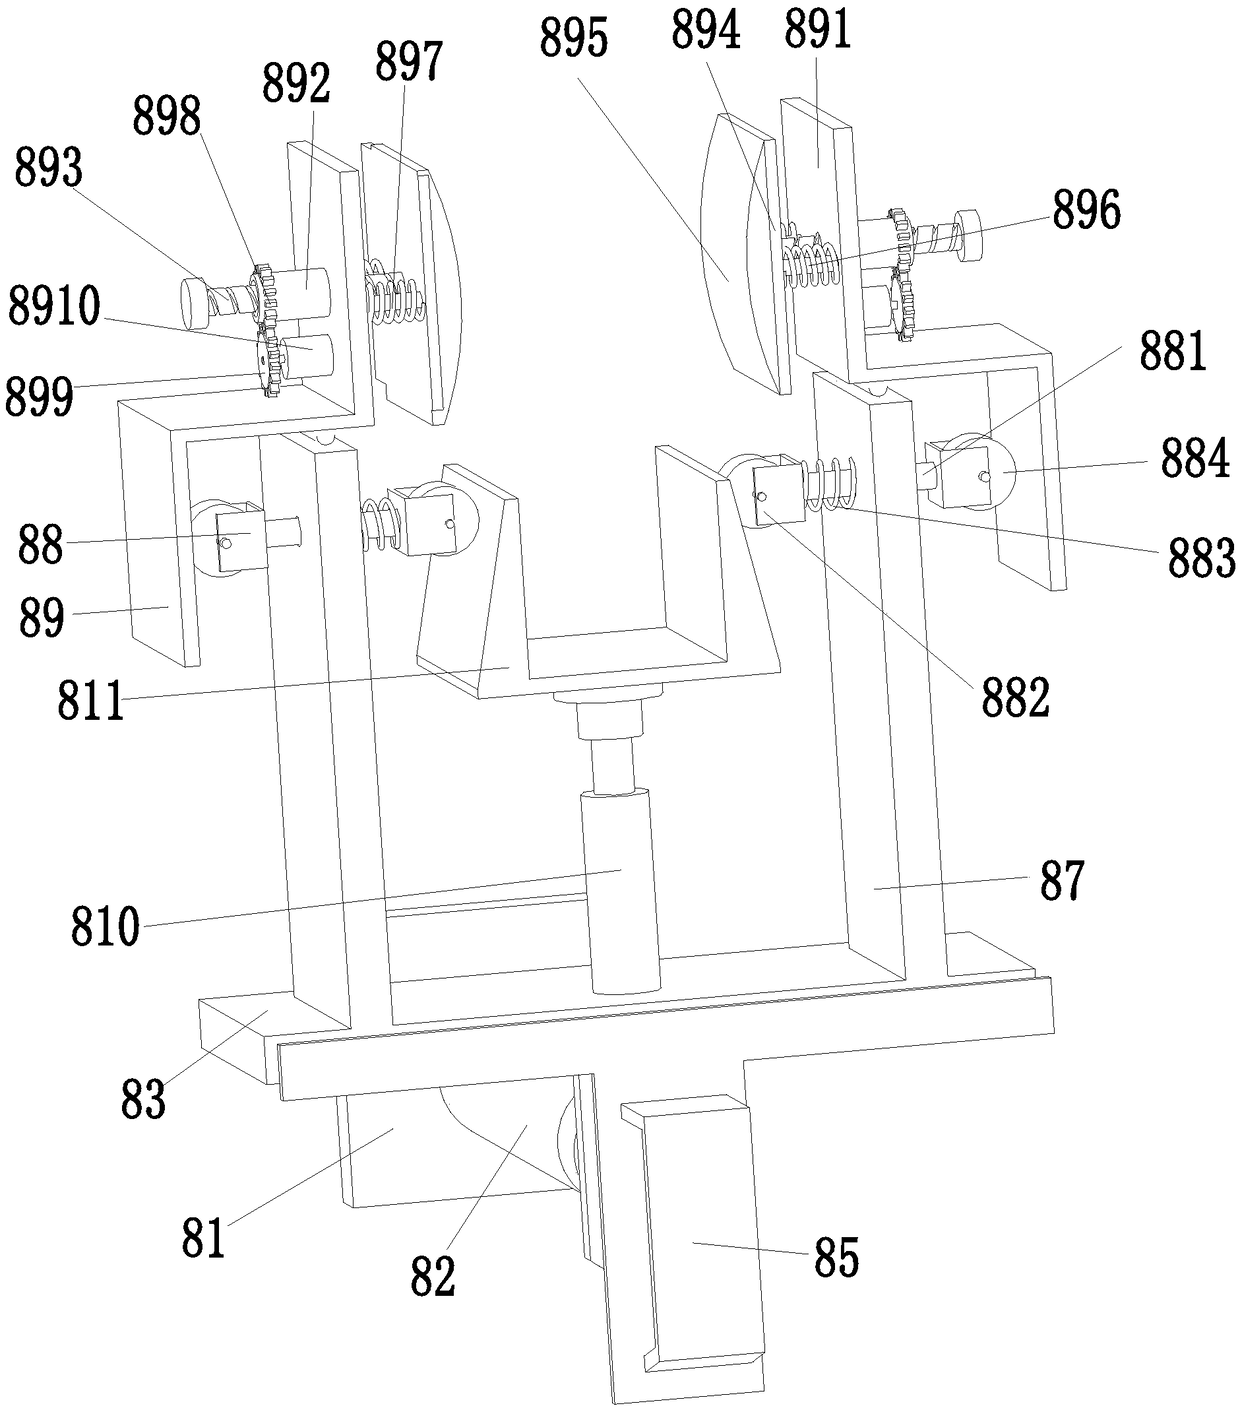 Apparatus for fixing a power bus slot